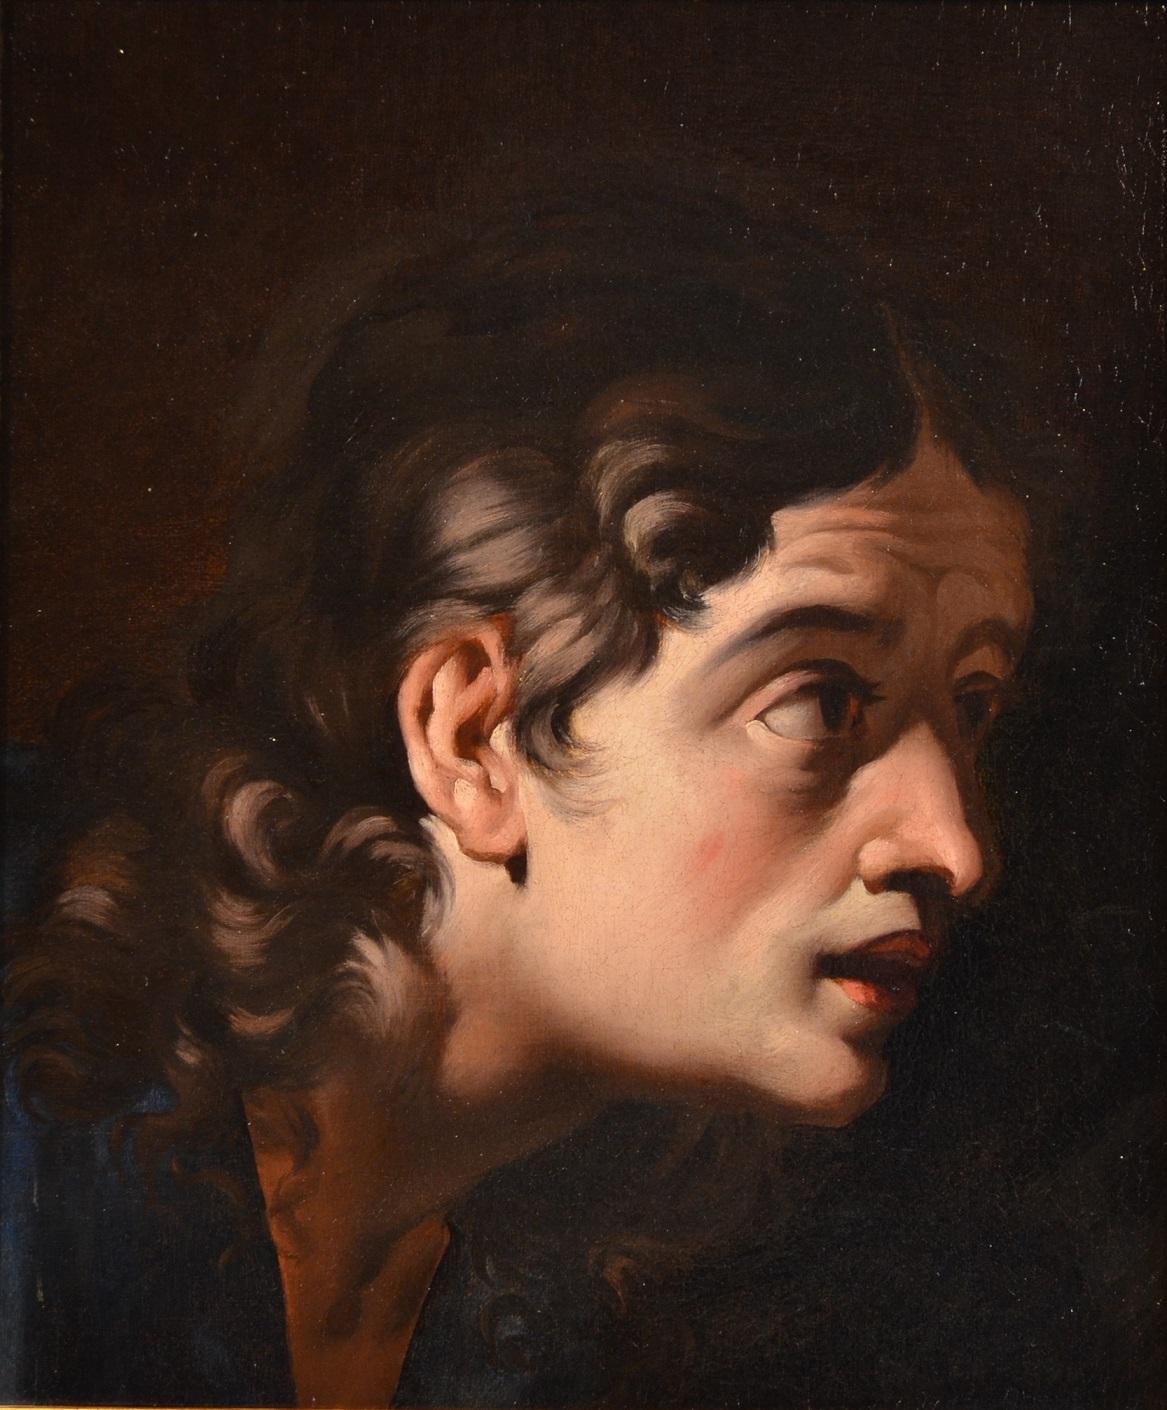 Nordic Caravaggesque of the 17th century (Utrecht School) Portrait Painting - Head Of Character Caravaggesque 17th Century Paint Oil on canvas Old master